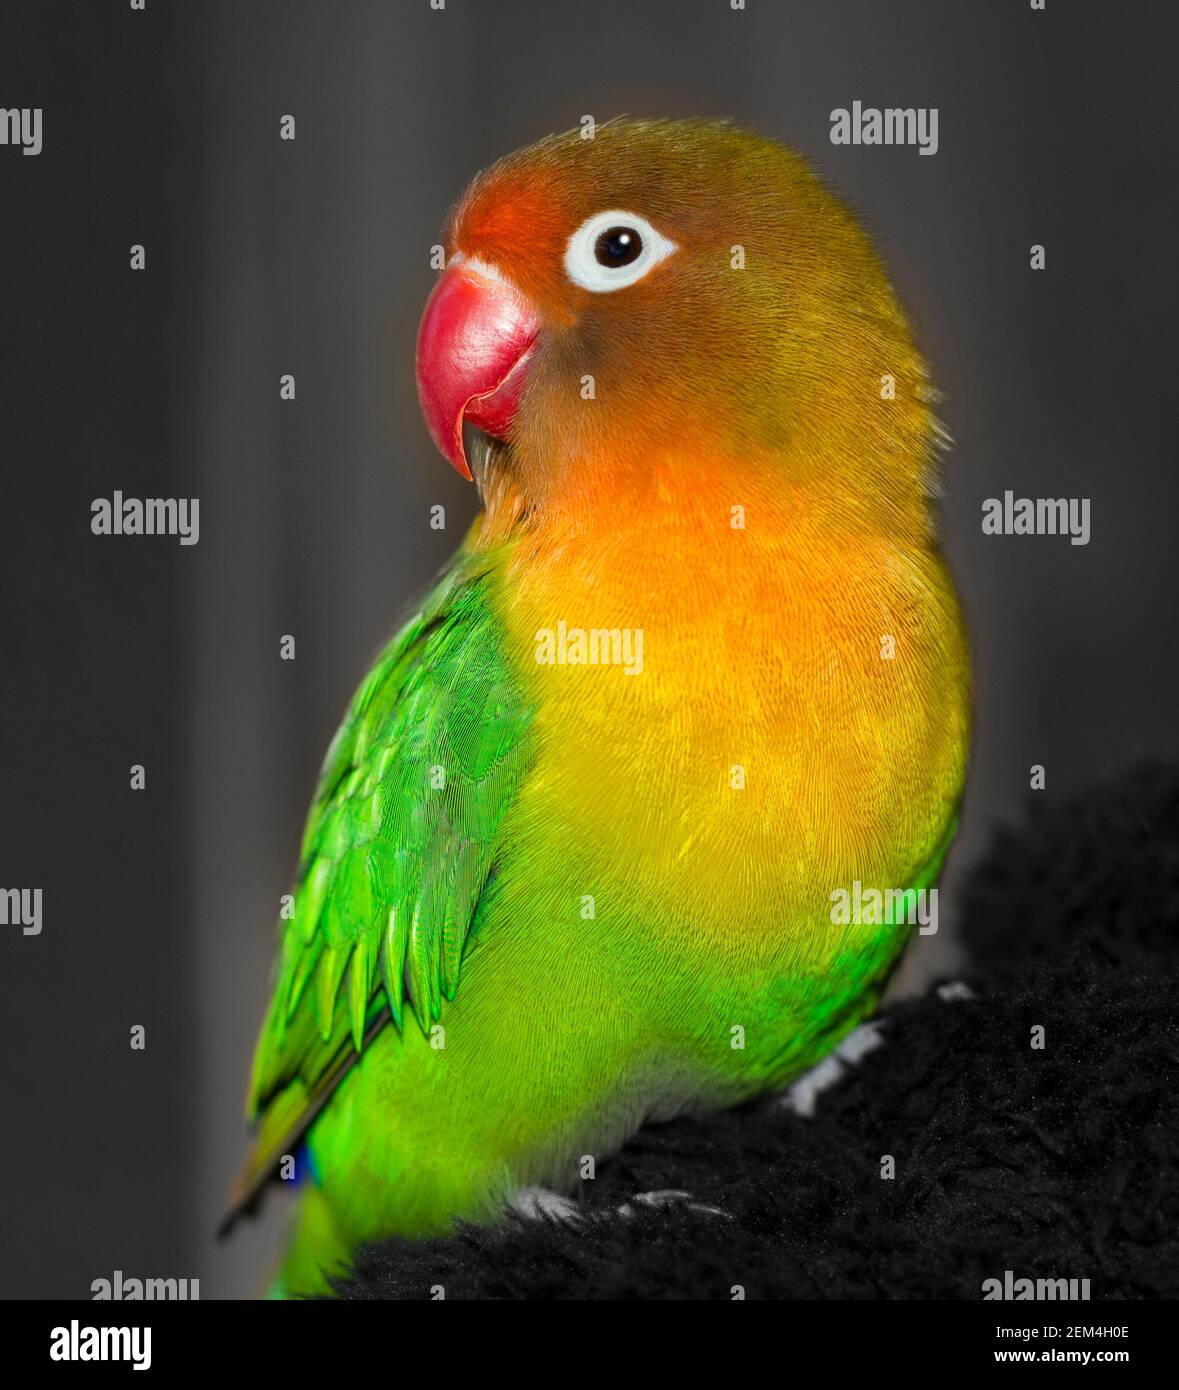 A close-up of a cute fisheri lovebird. The bird is green, yellow and red. Stock Photo